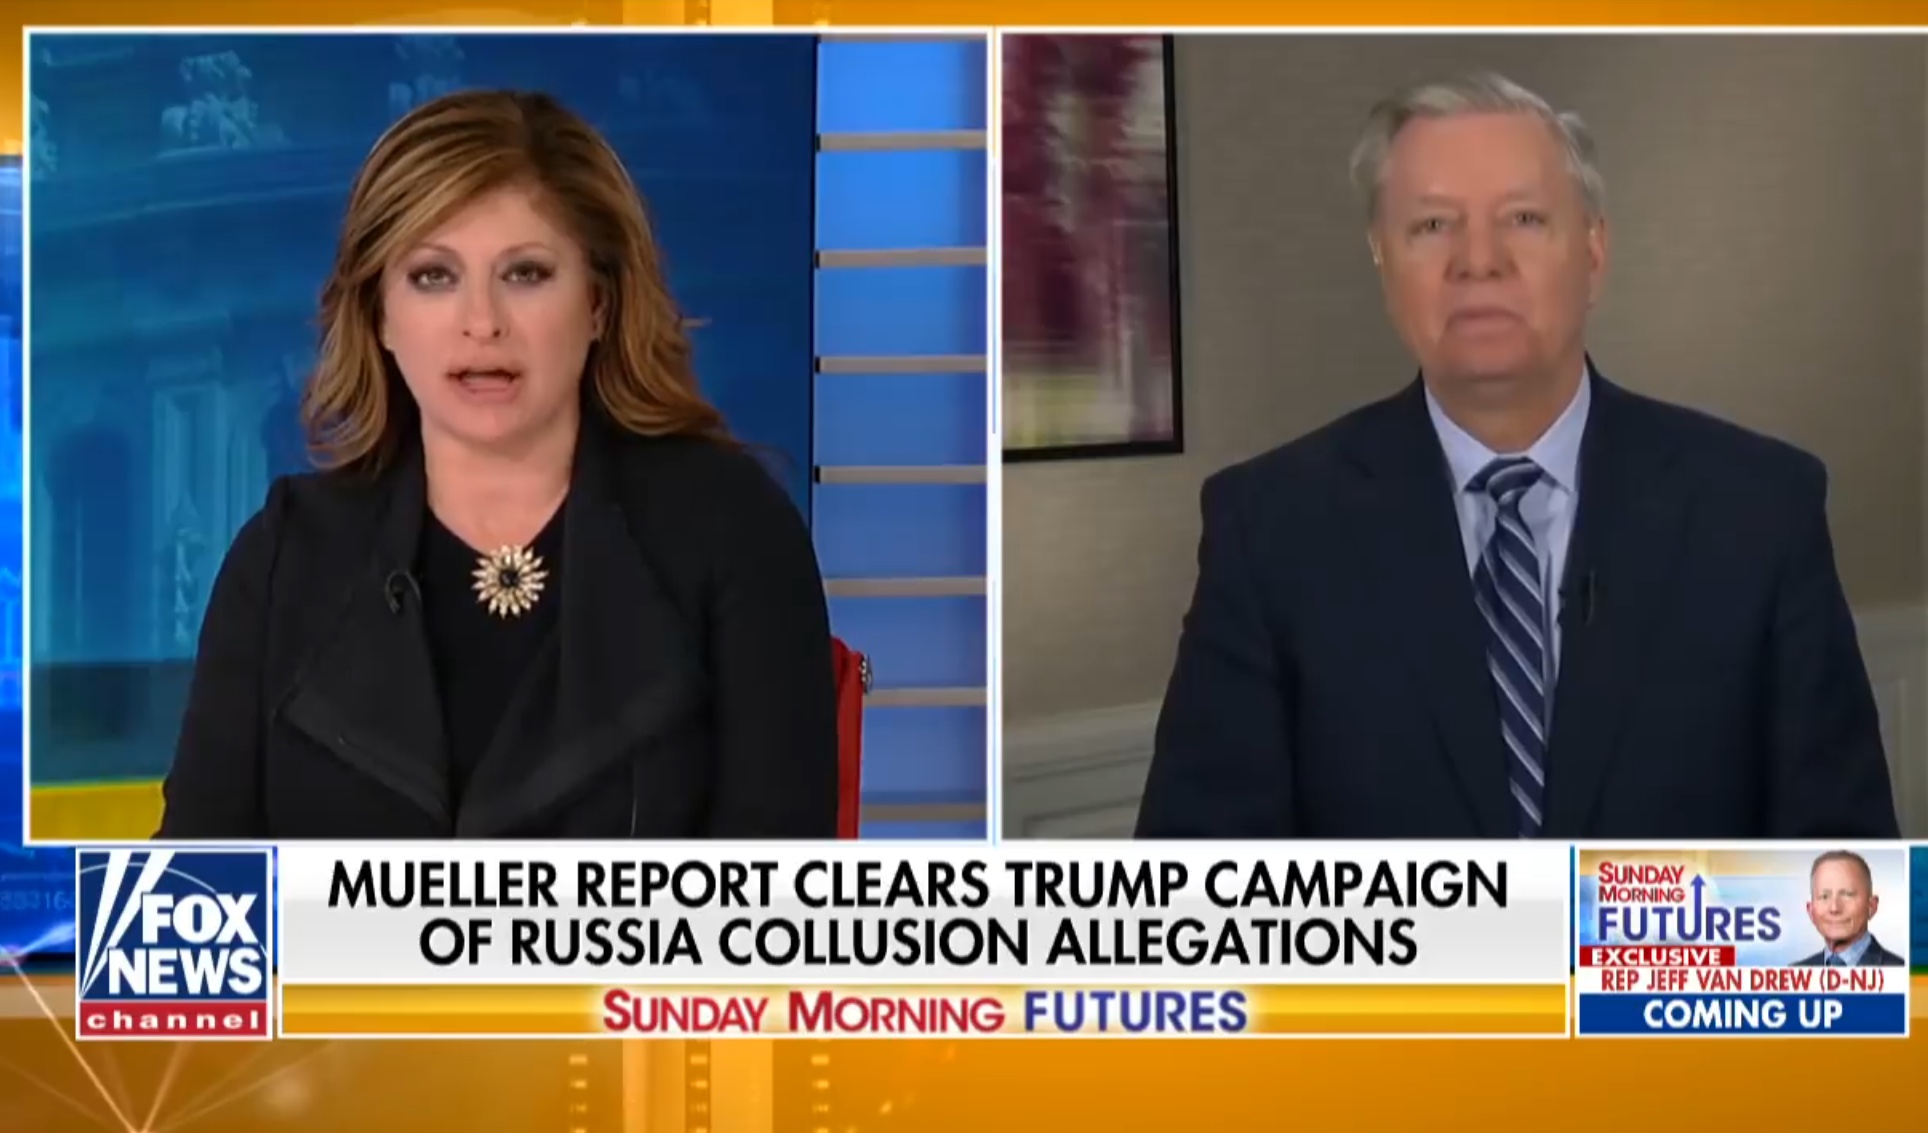 S.C. Republican Sen. Lindsey Graham appears on Fox News’ “Sunday Morning Futures” to discuss Clinton emails, March 31, 2019. YouTube screenshot